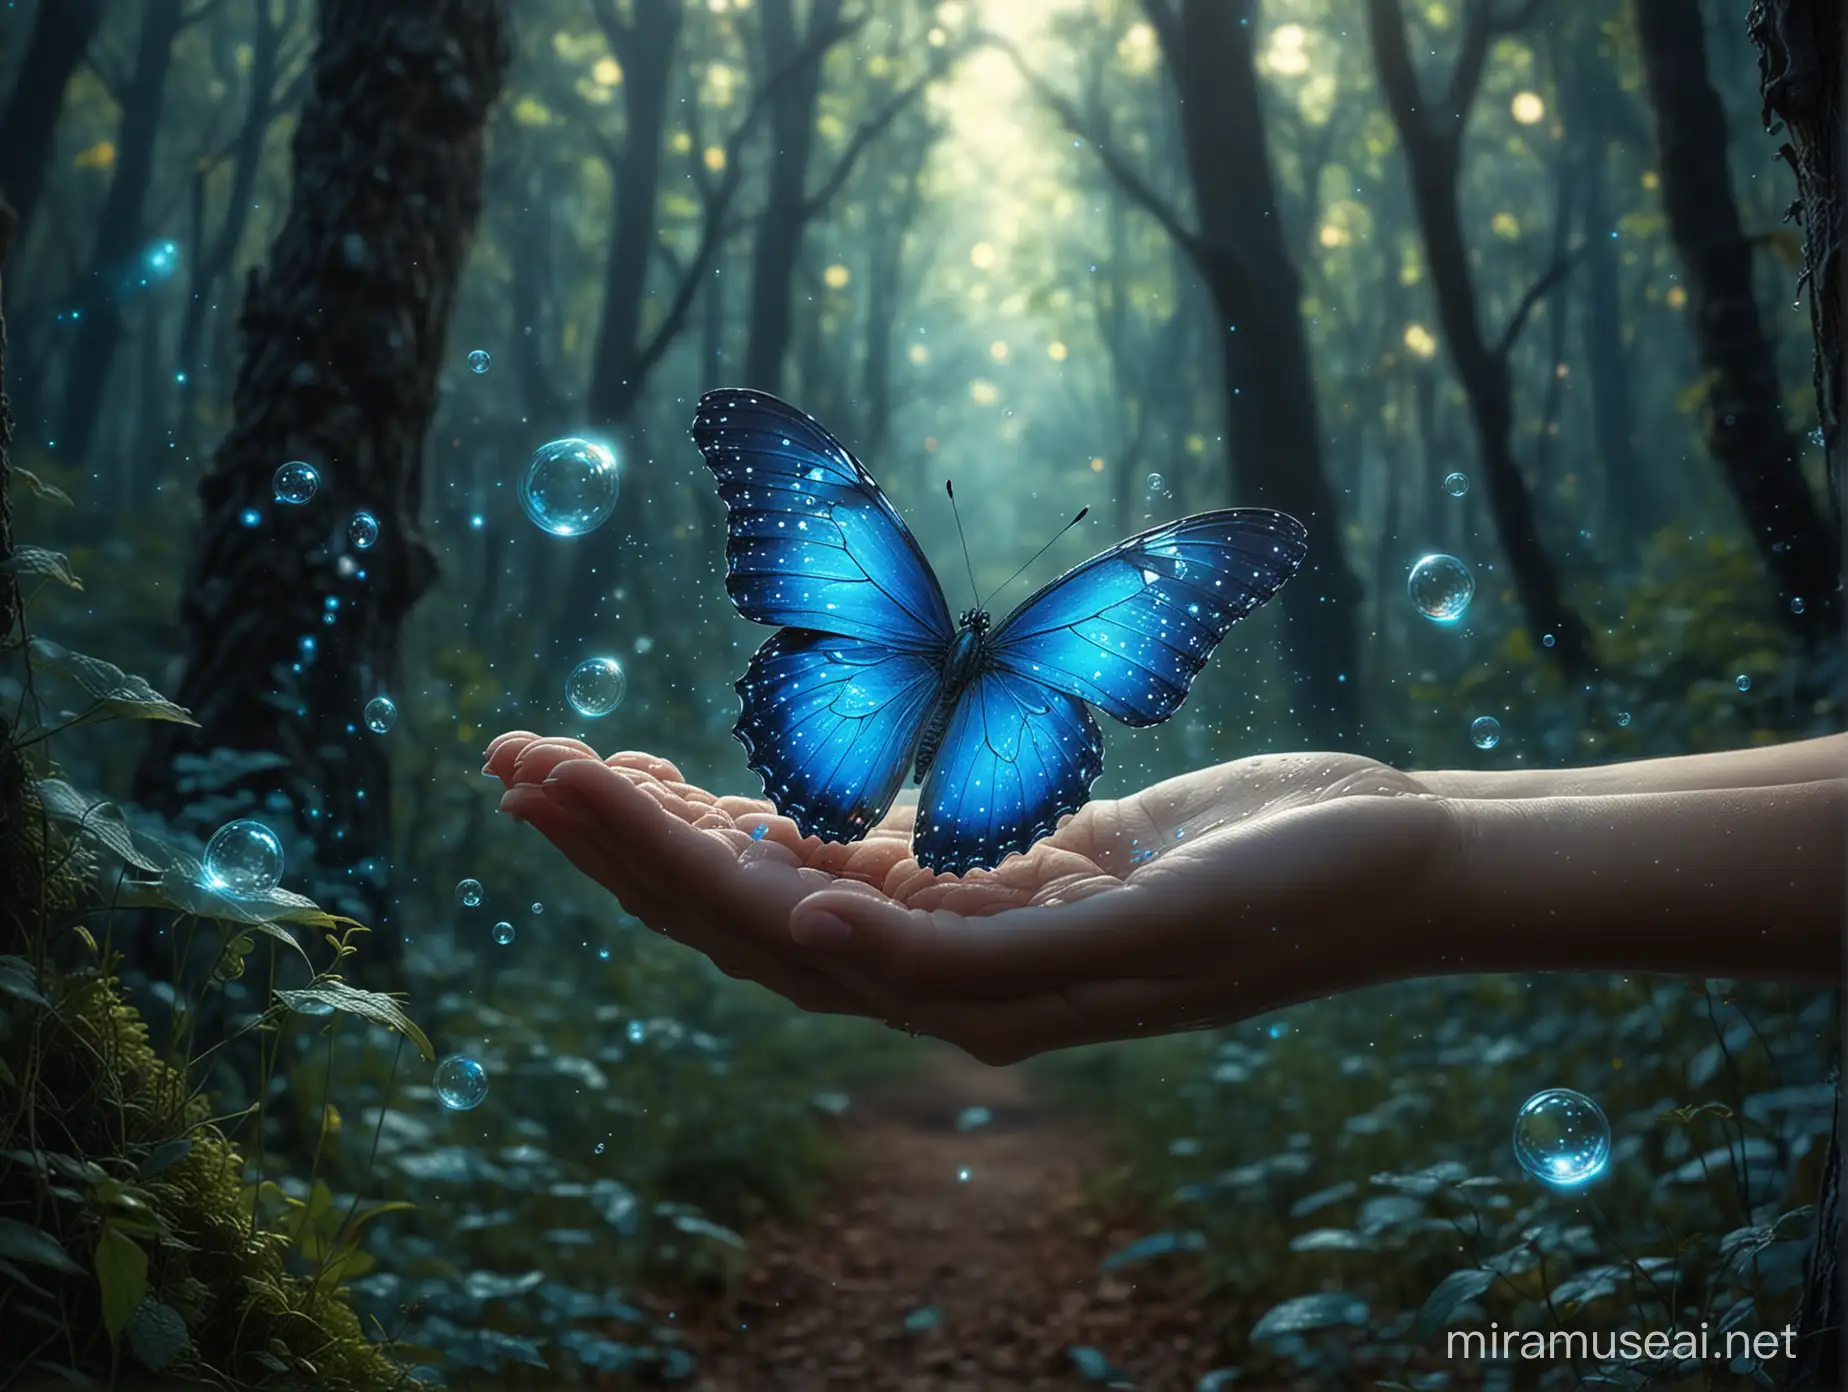 Enchanting Scene Bright Blue Butterfly Resting on a Little Girls Hand in a Magical Forest